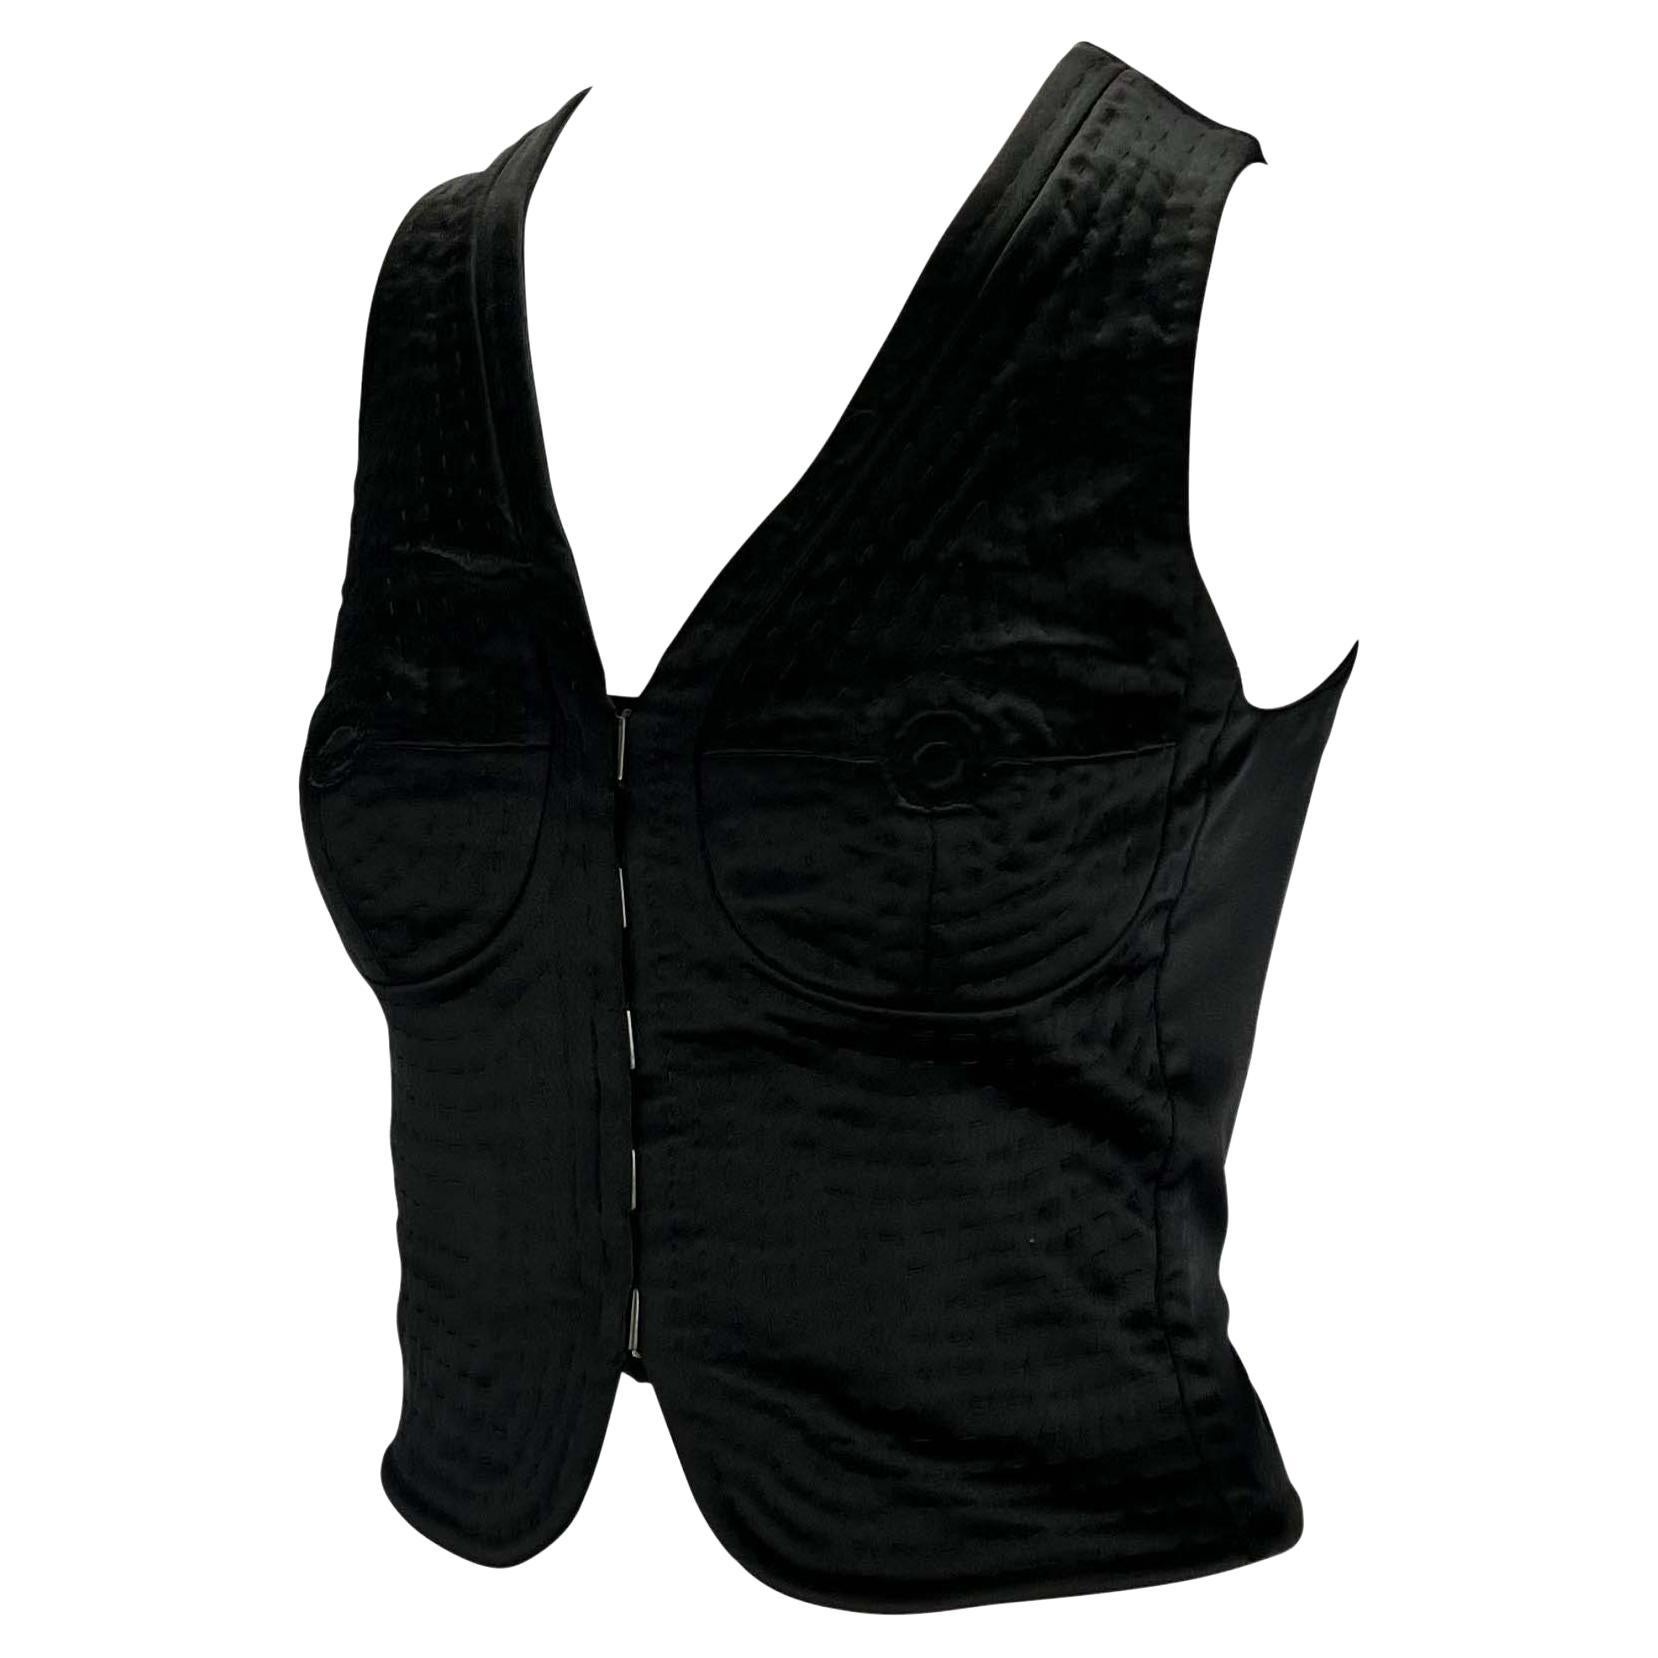 Women's S/S 2003 Yves Saint Laurent by Tom Ford Runway Nude Illusion Satin Breast Vest 